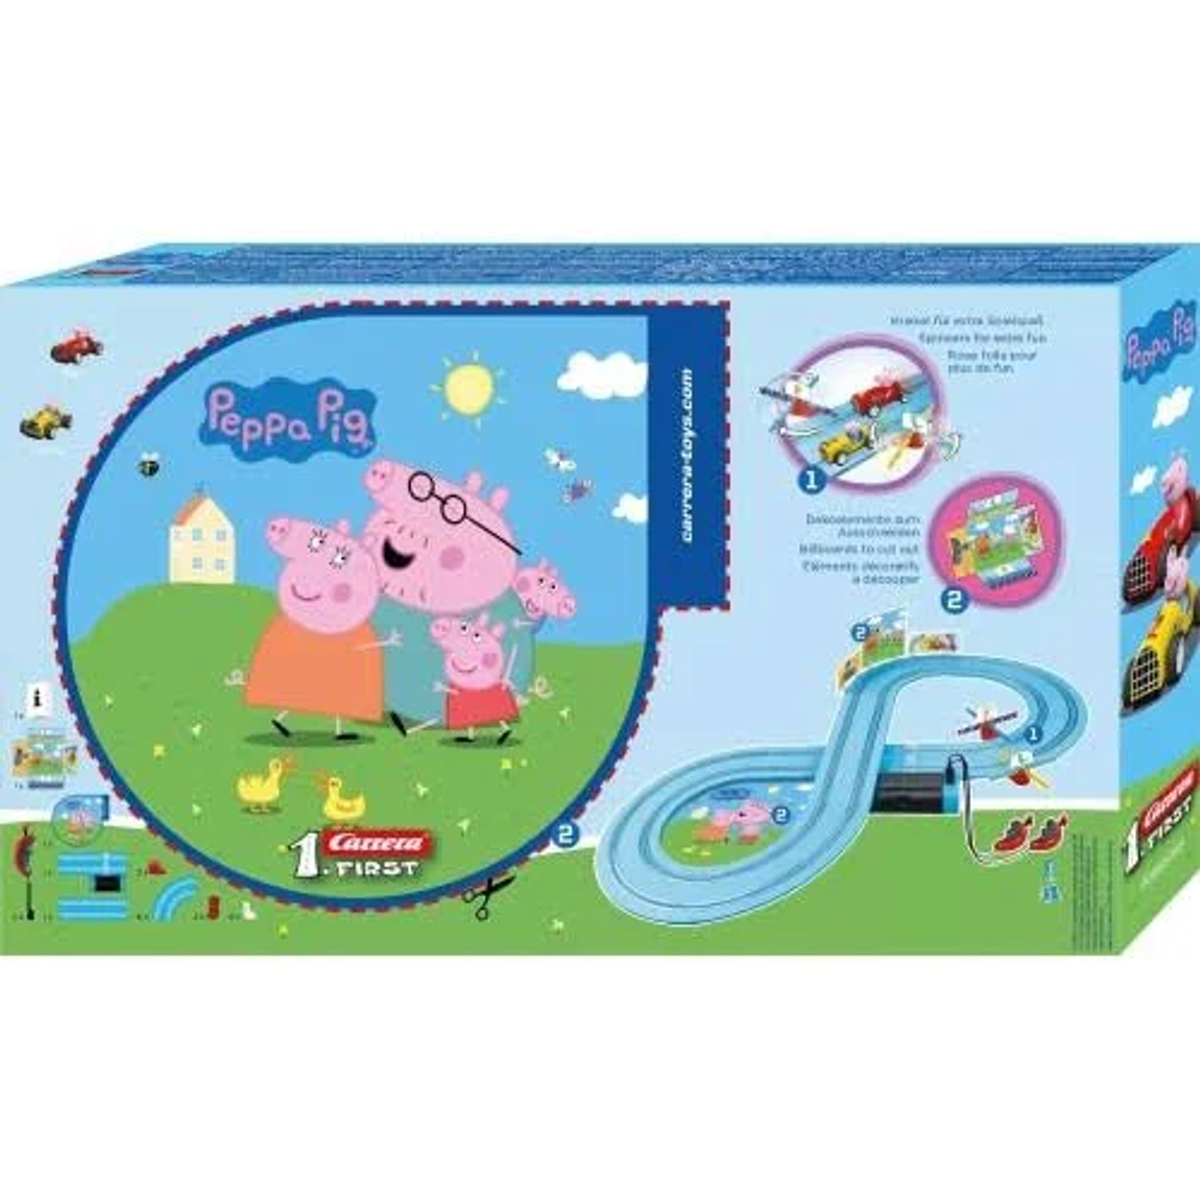 PEPPA PIG Spielzeugsets 20063043